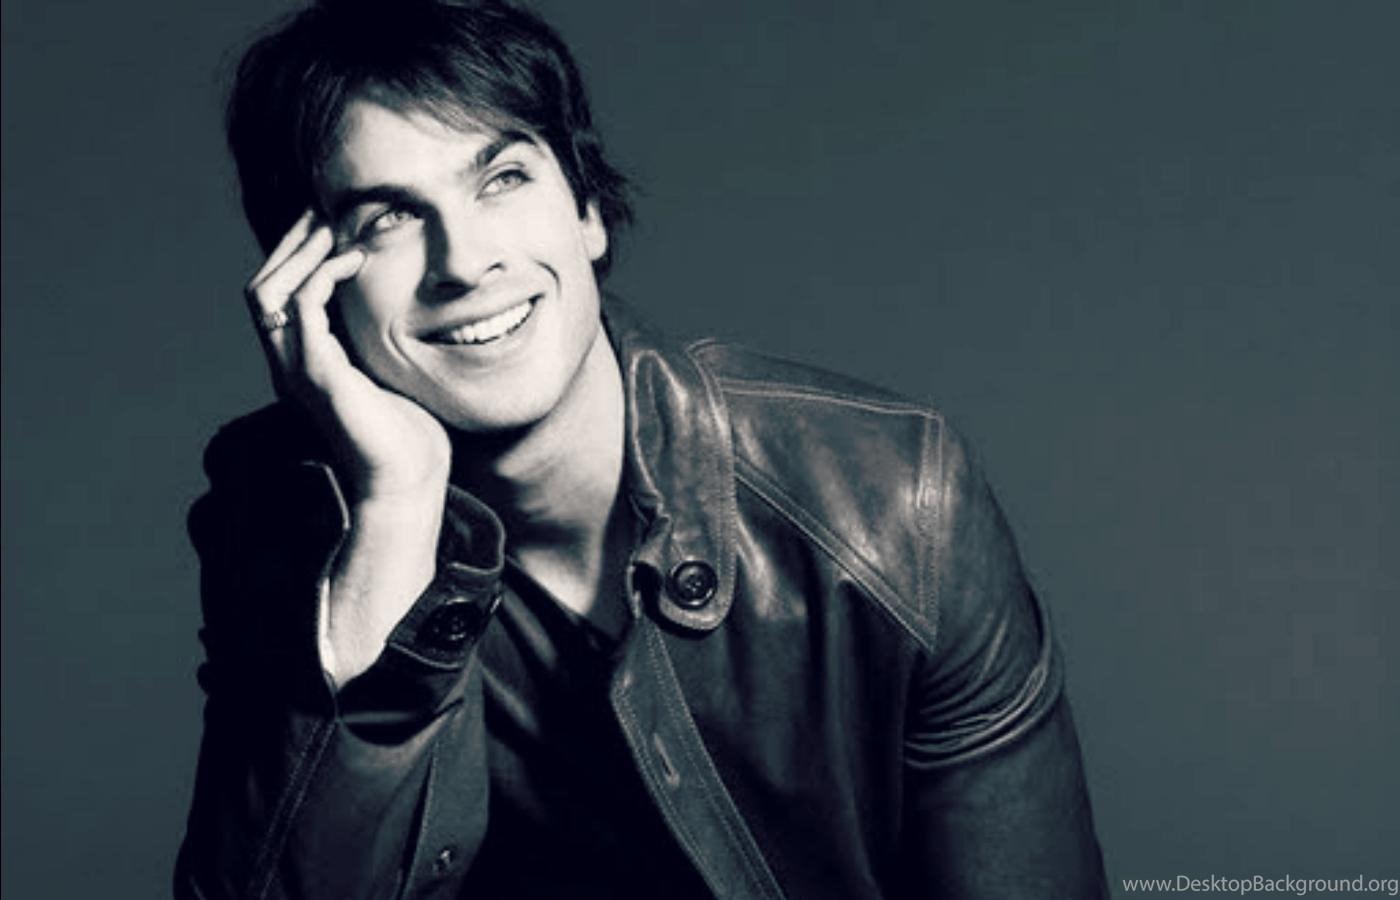 1620x2160 Ian Somerhalder Blue eyes wallpapers 1620x2160 Resolution  Wallpaper HD Celebrities 4K Wallpapers Images Photos and Background   Wallpapers Den